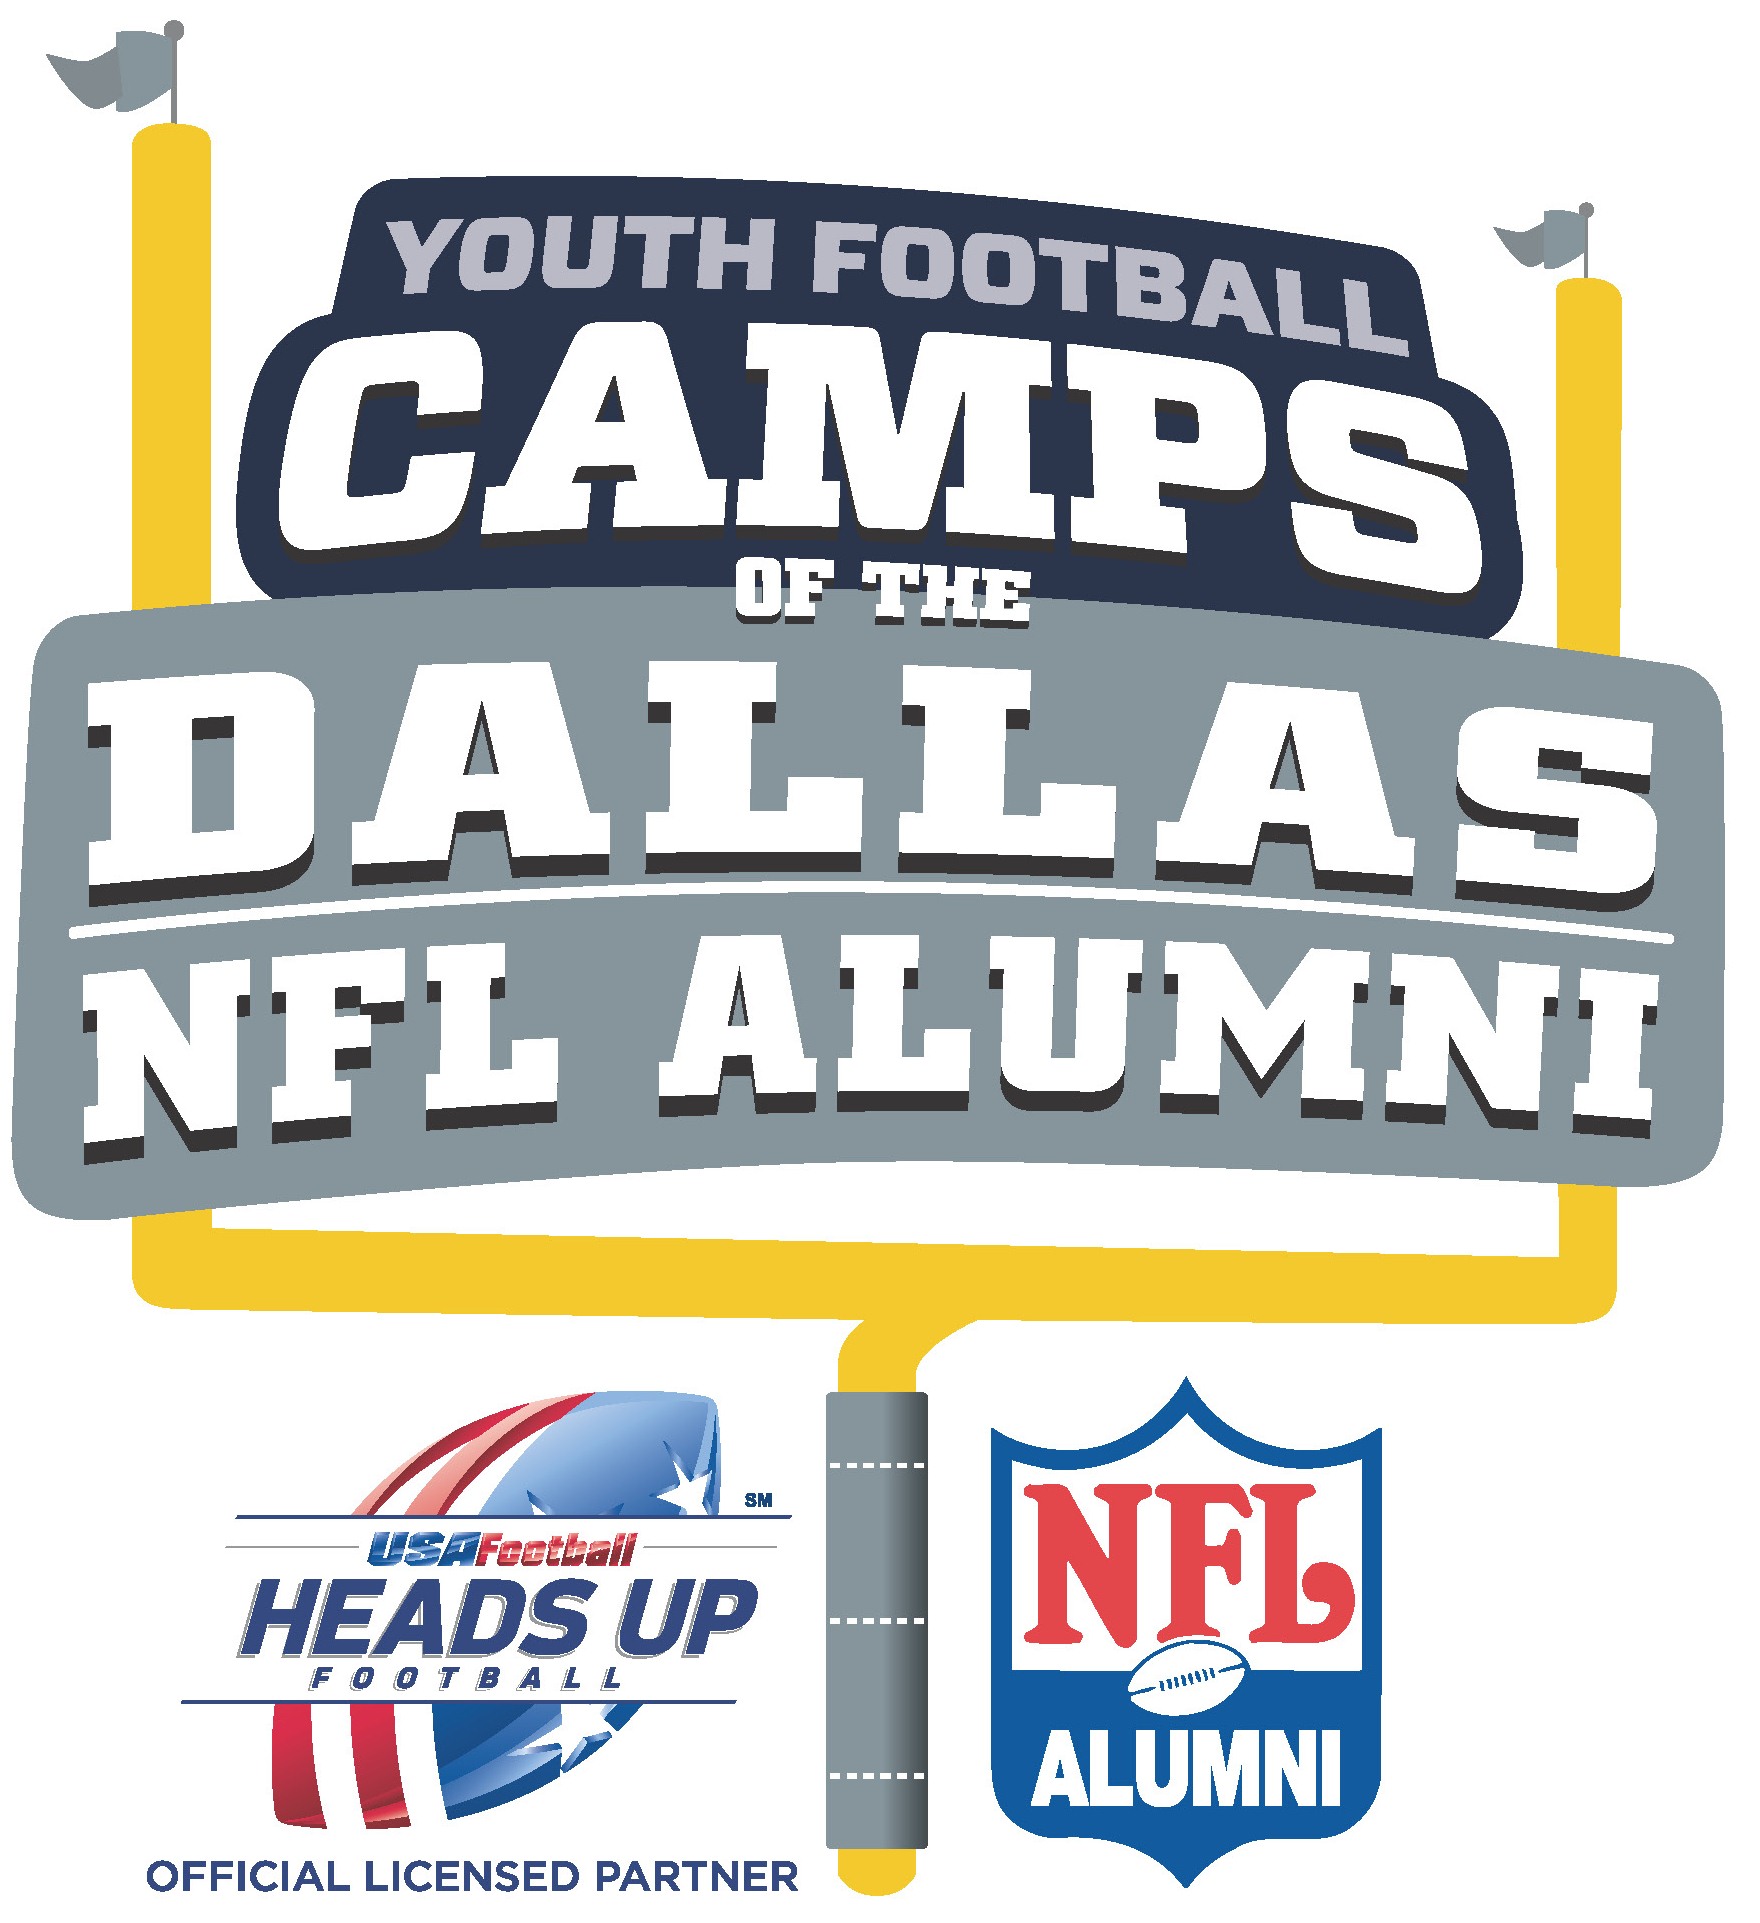 Dallas NFL Alumni Youth Football Camps, 2016 Pro Sports Experience